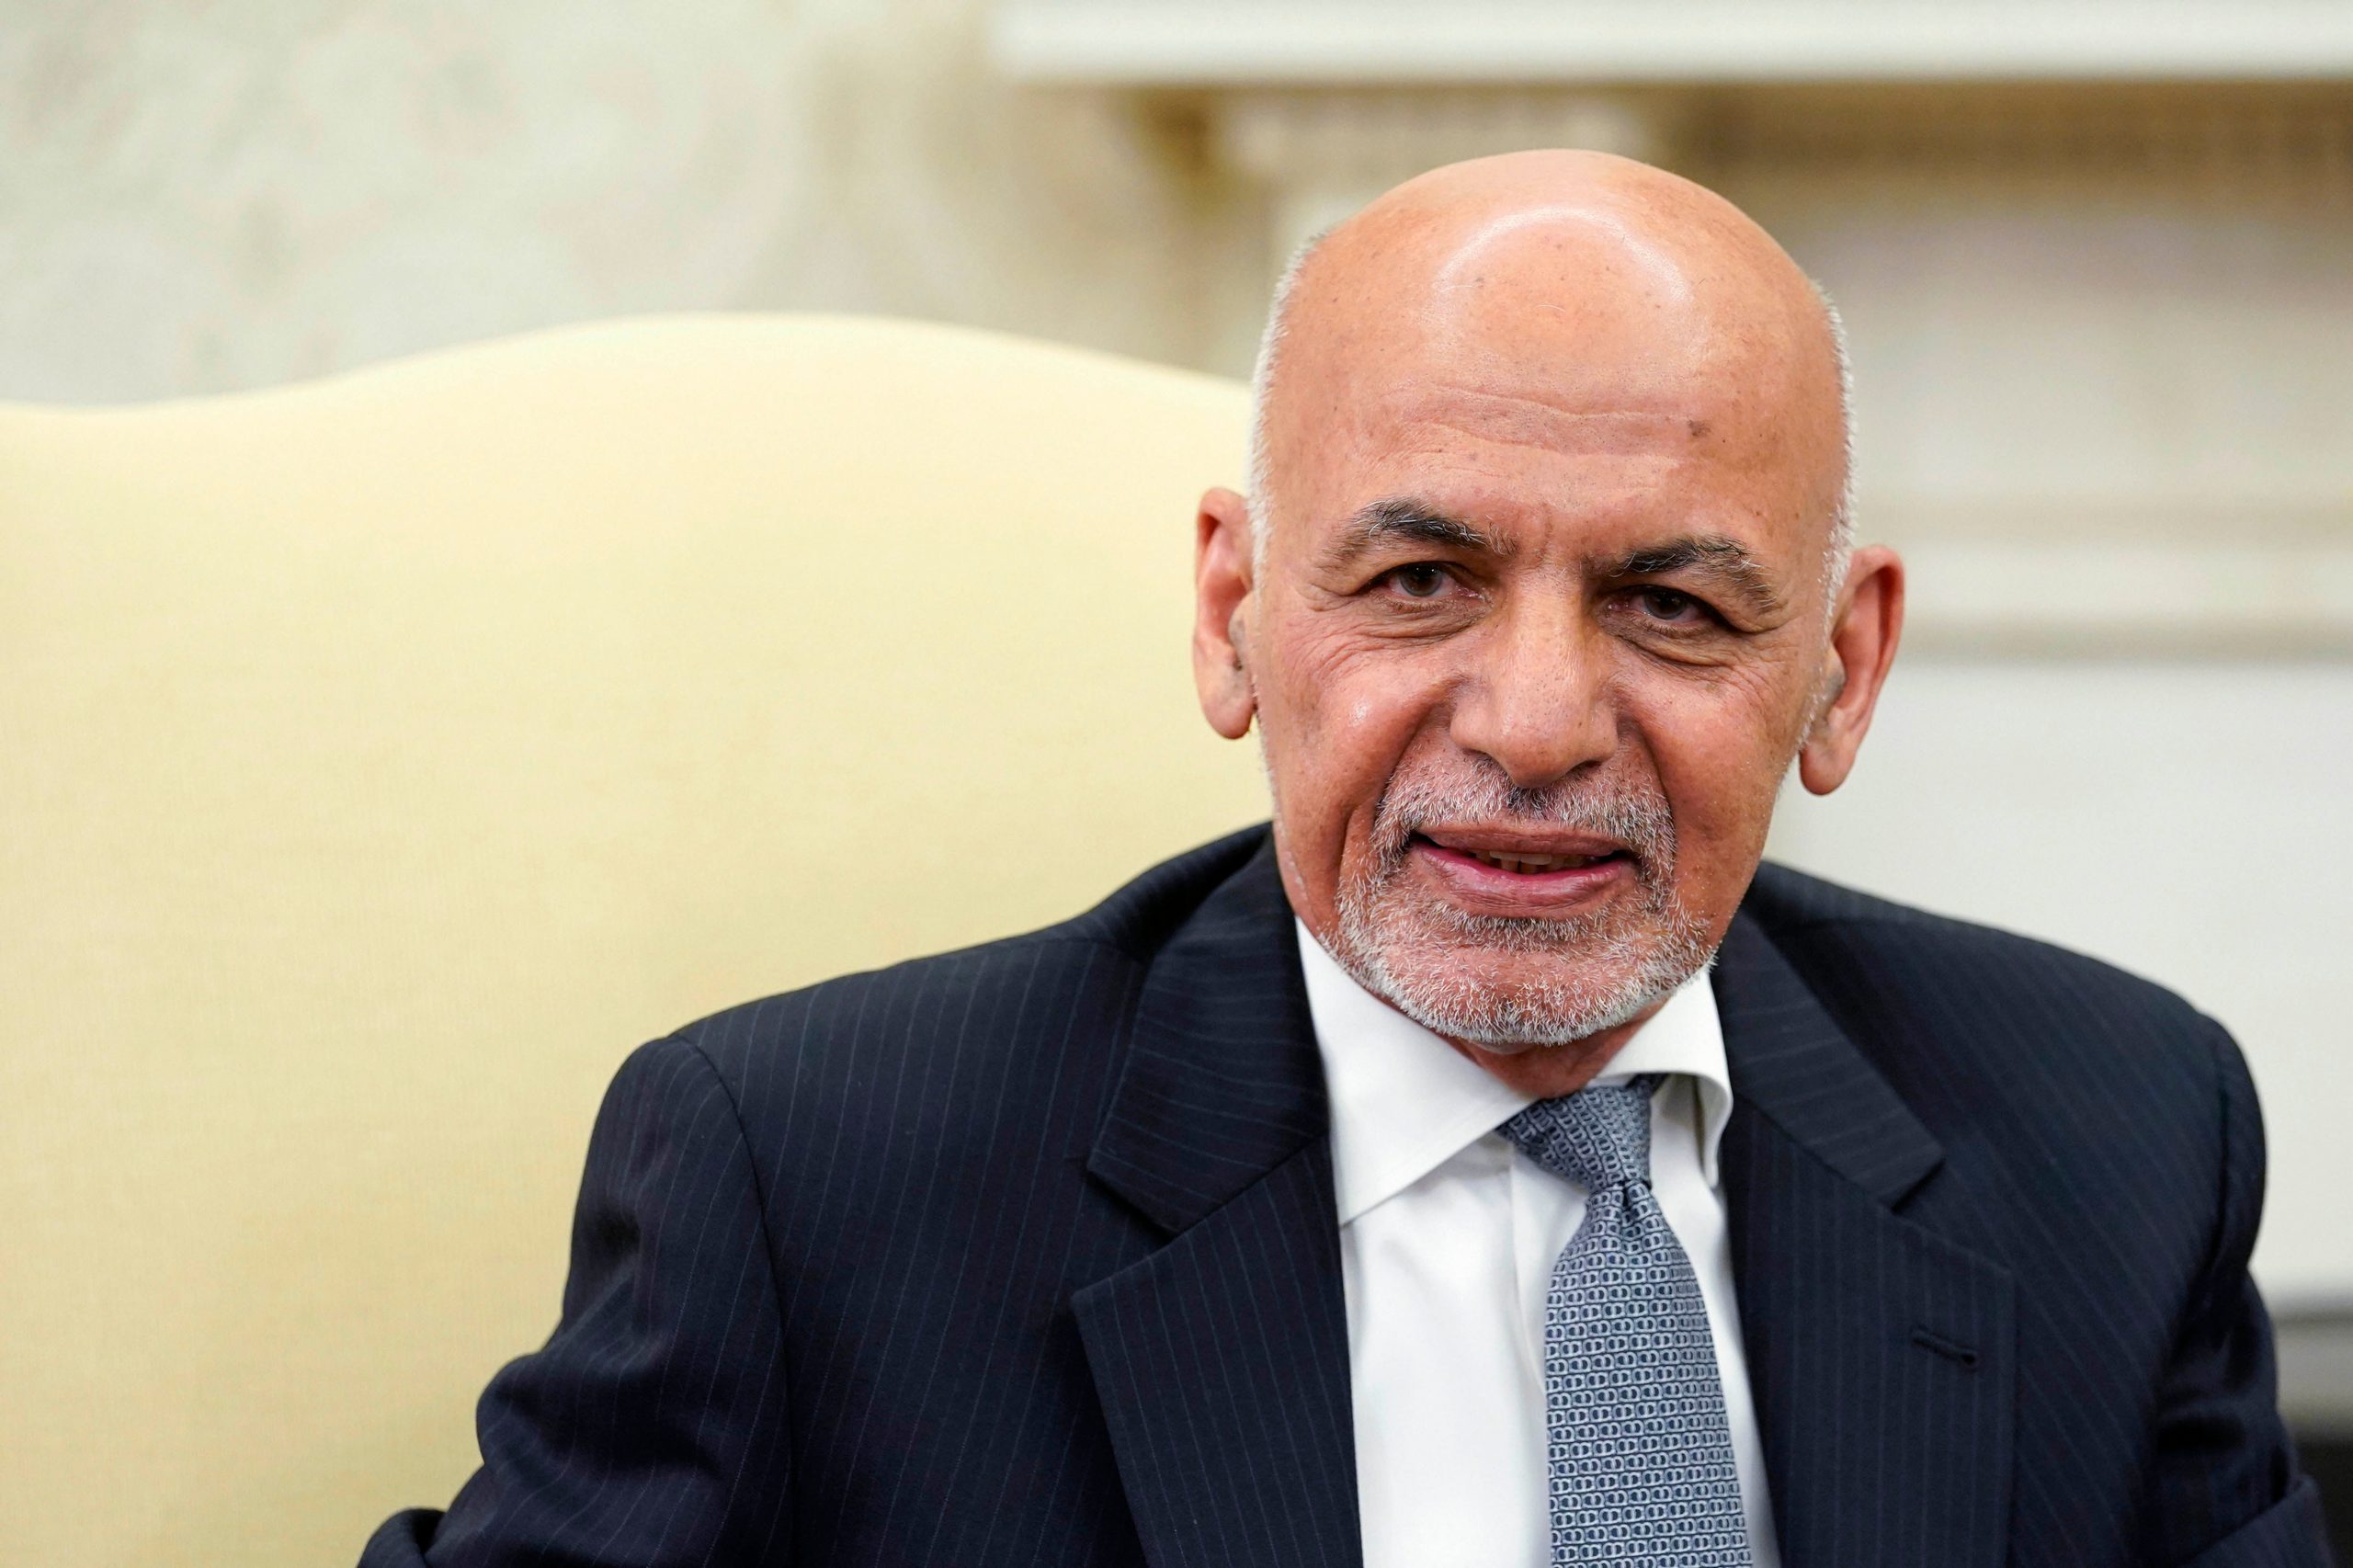 Ashraf Ghani said ‘will fight to death’ and fled next day: Blinken